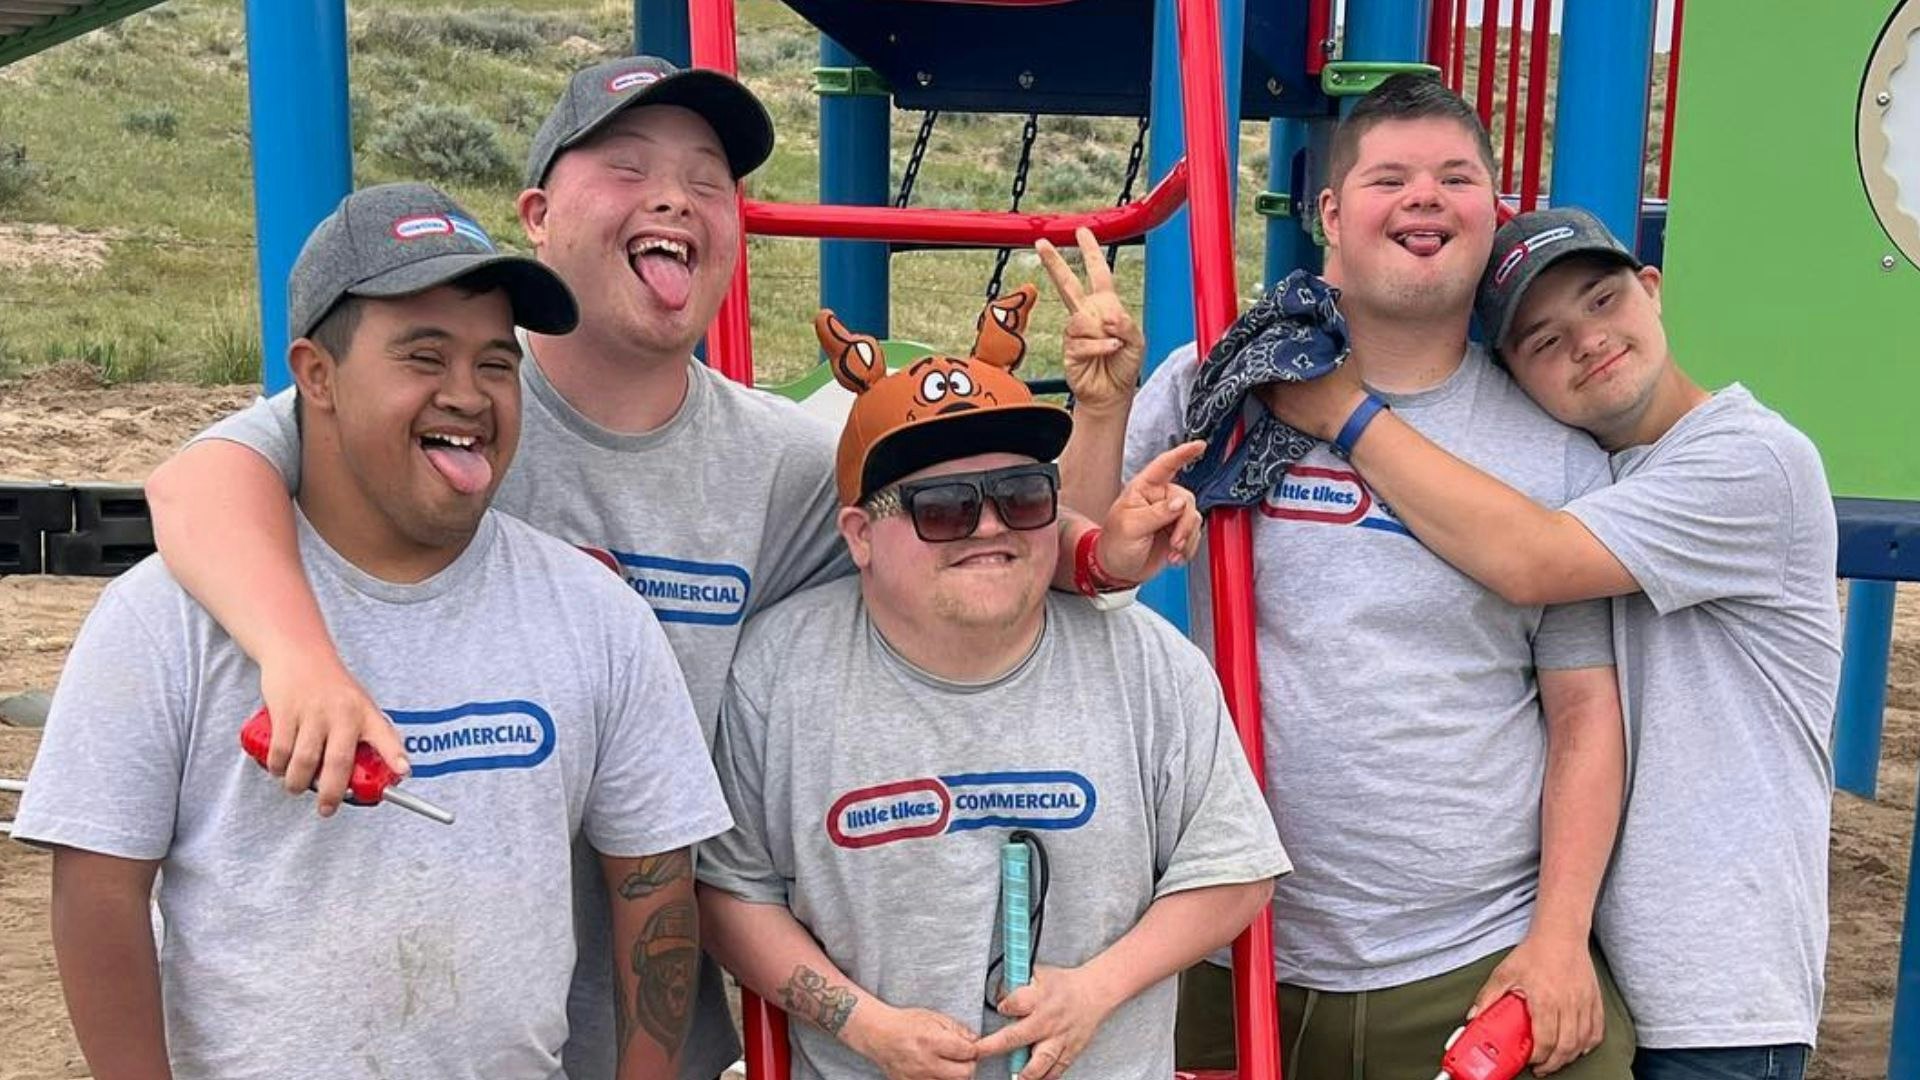 The Pinkerton family of Glenrock, Wyoming, has adopted six kids with Down syndrome. Here are five of them, who were all smiles recently after installing a playground in their backyard.